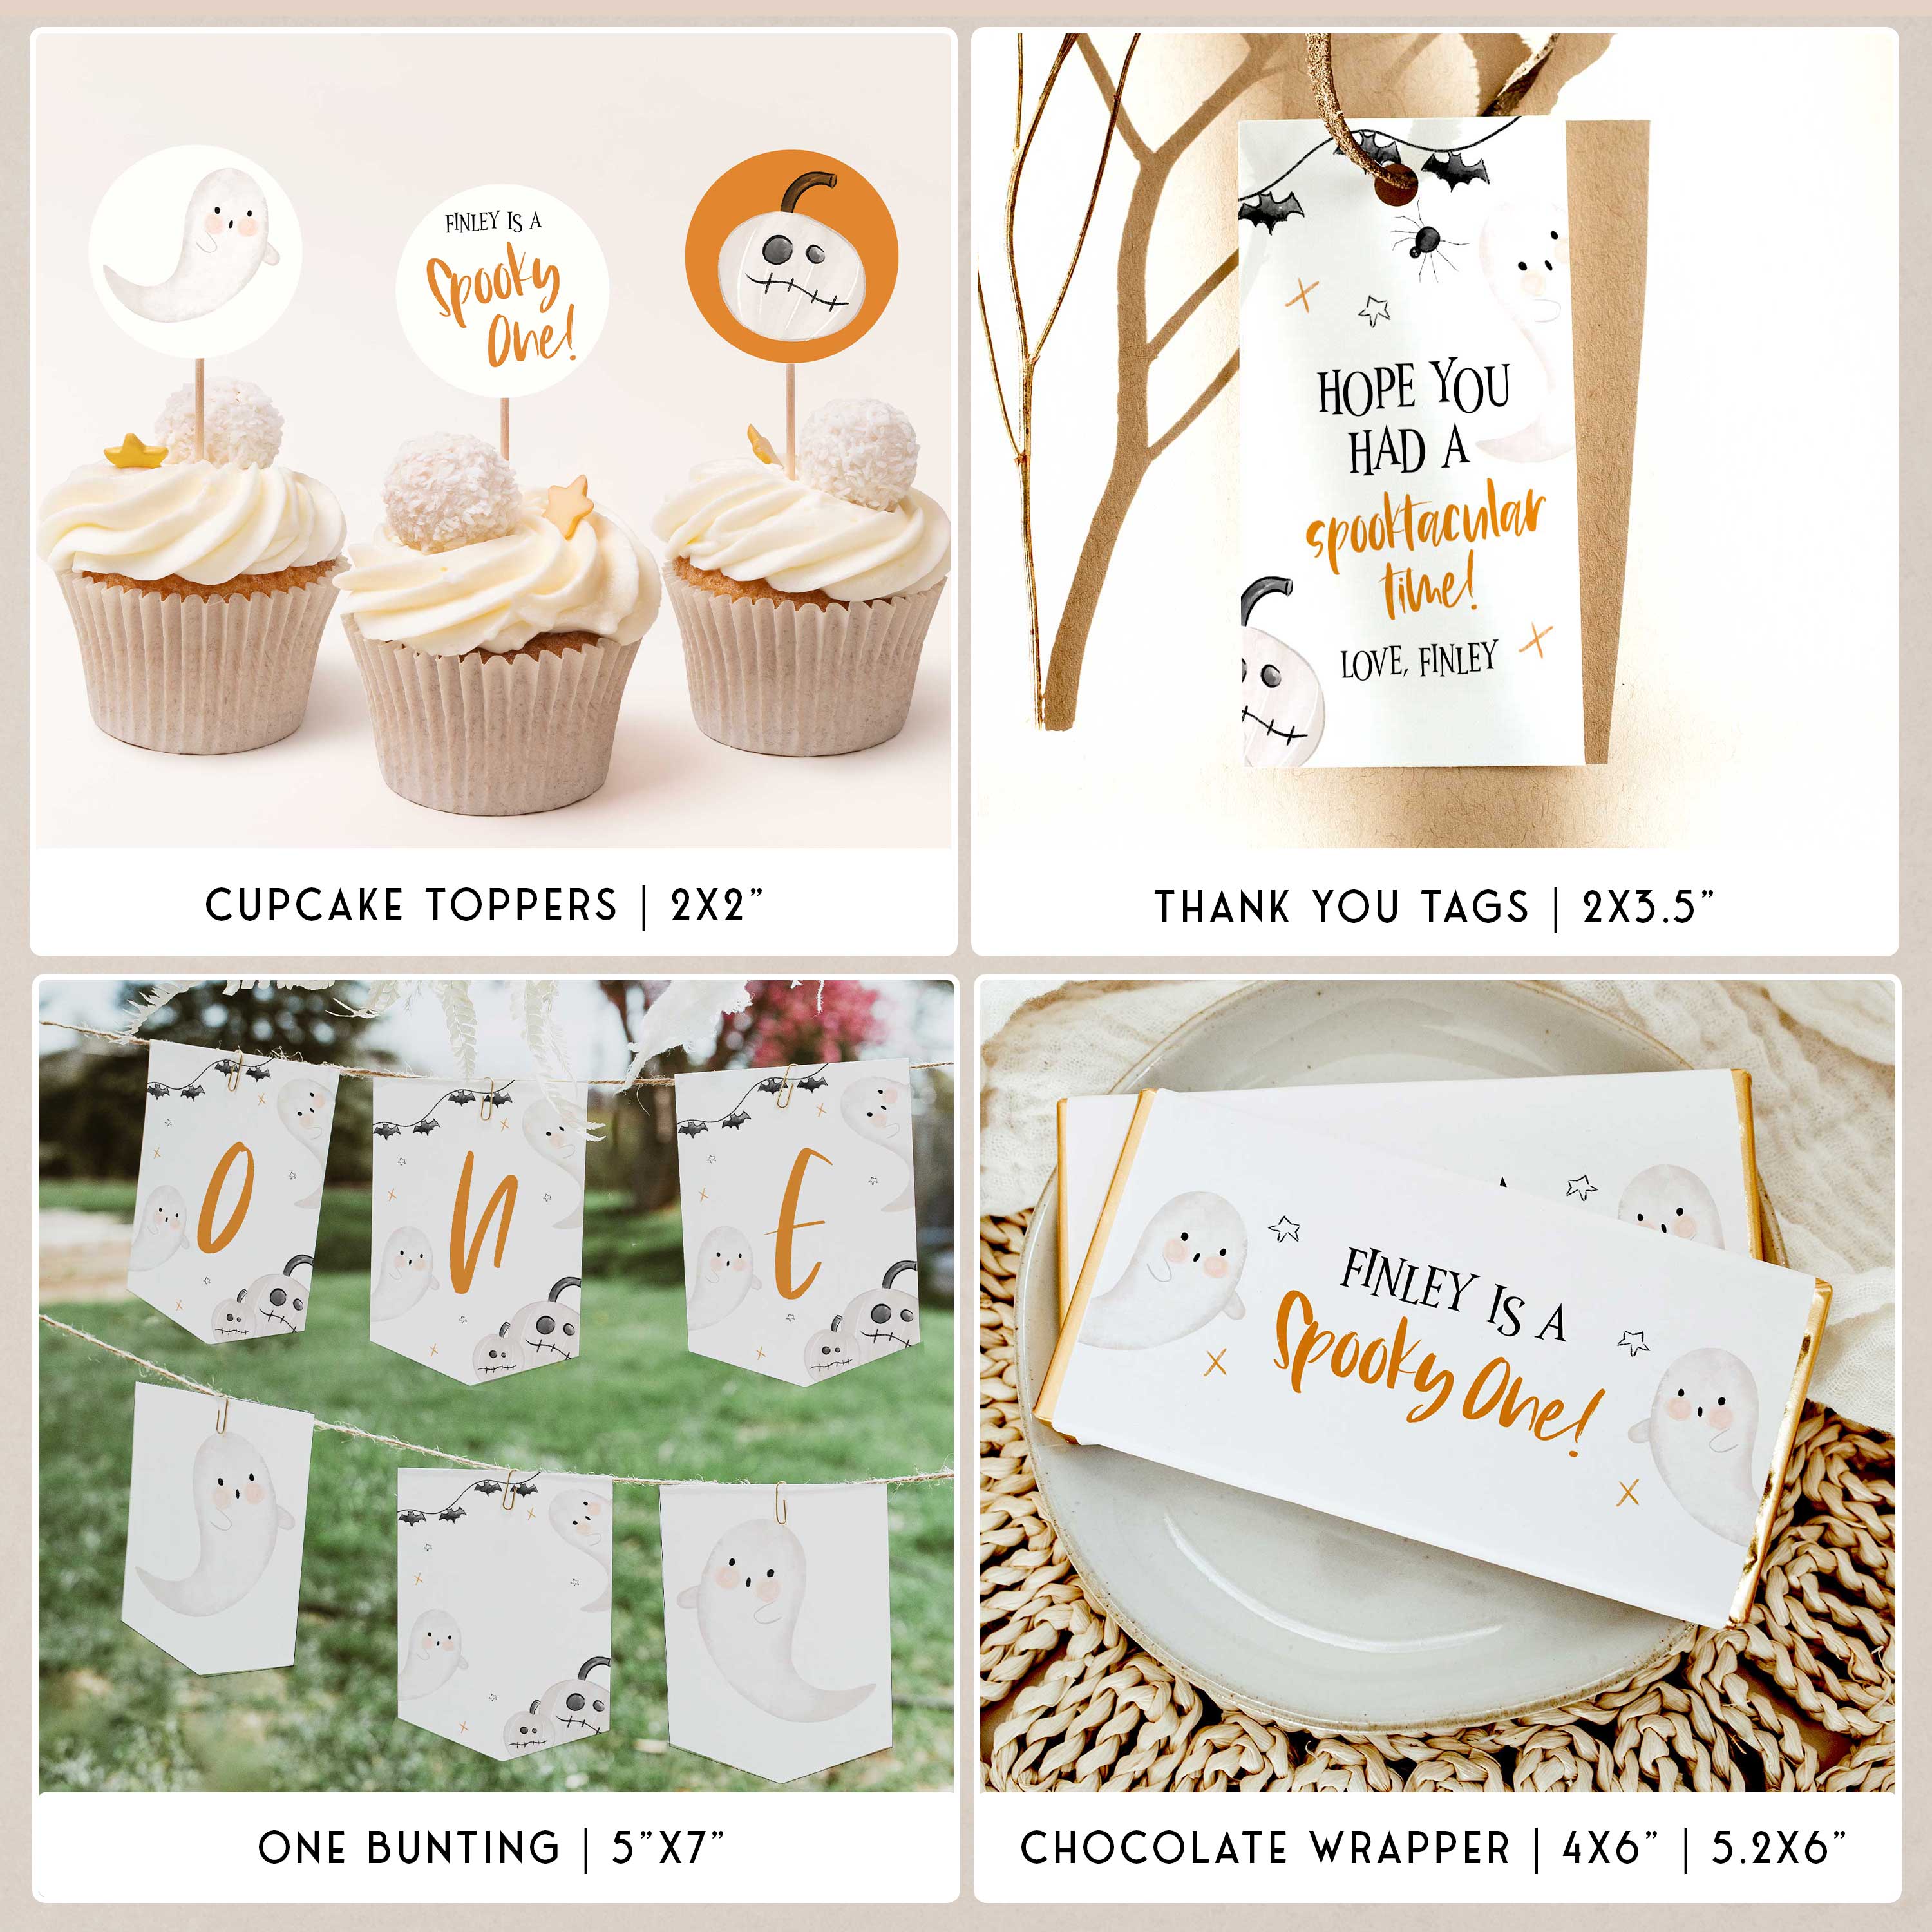 SPOOKY ONE first birthday bundle including invitations, welcome signs, my first year signs, labels, tags, table signs, bunting and more